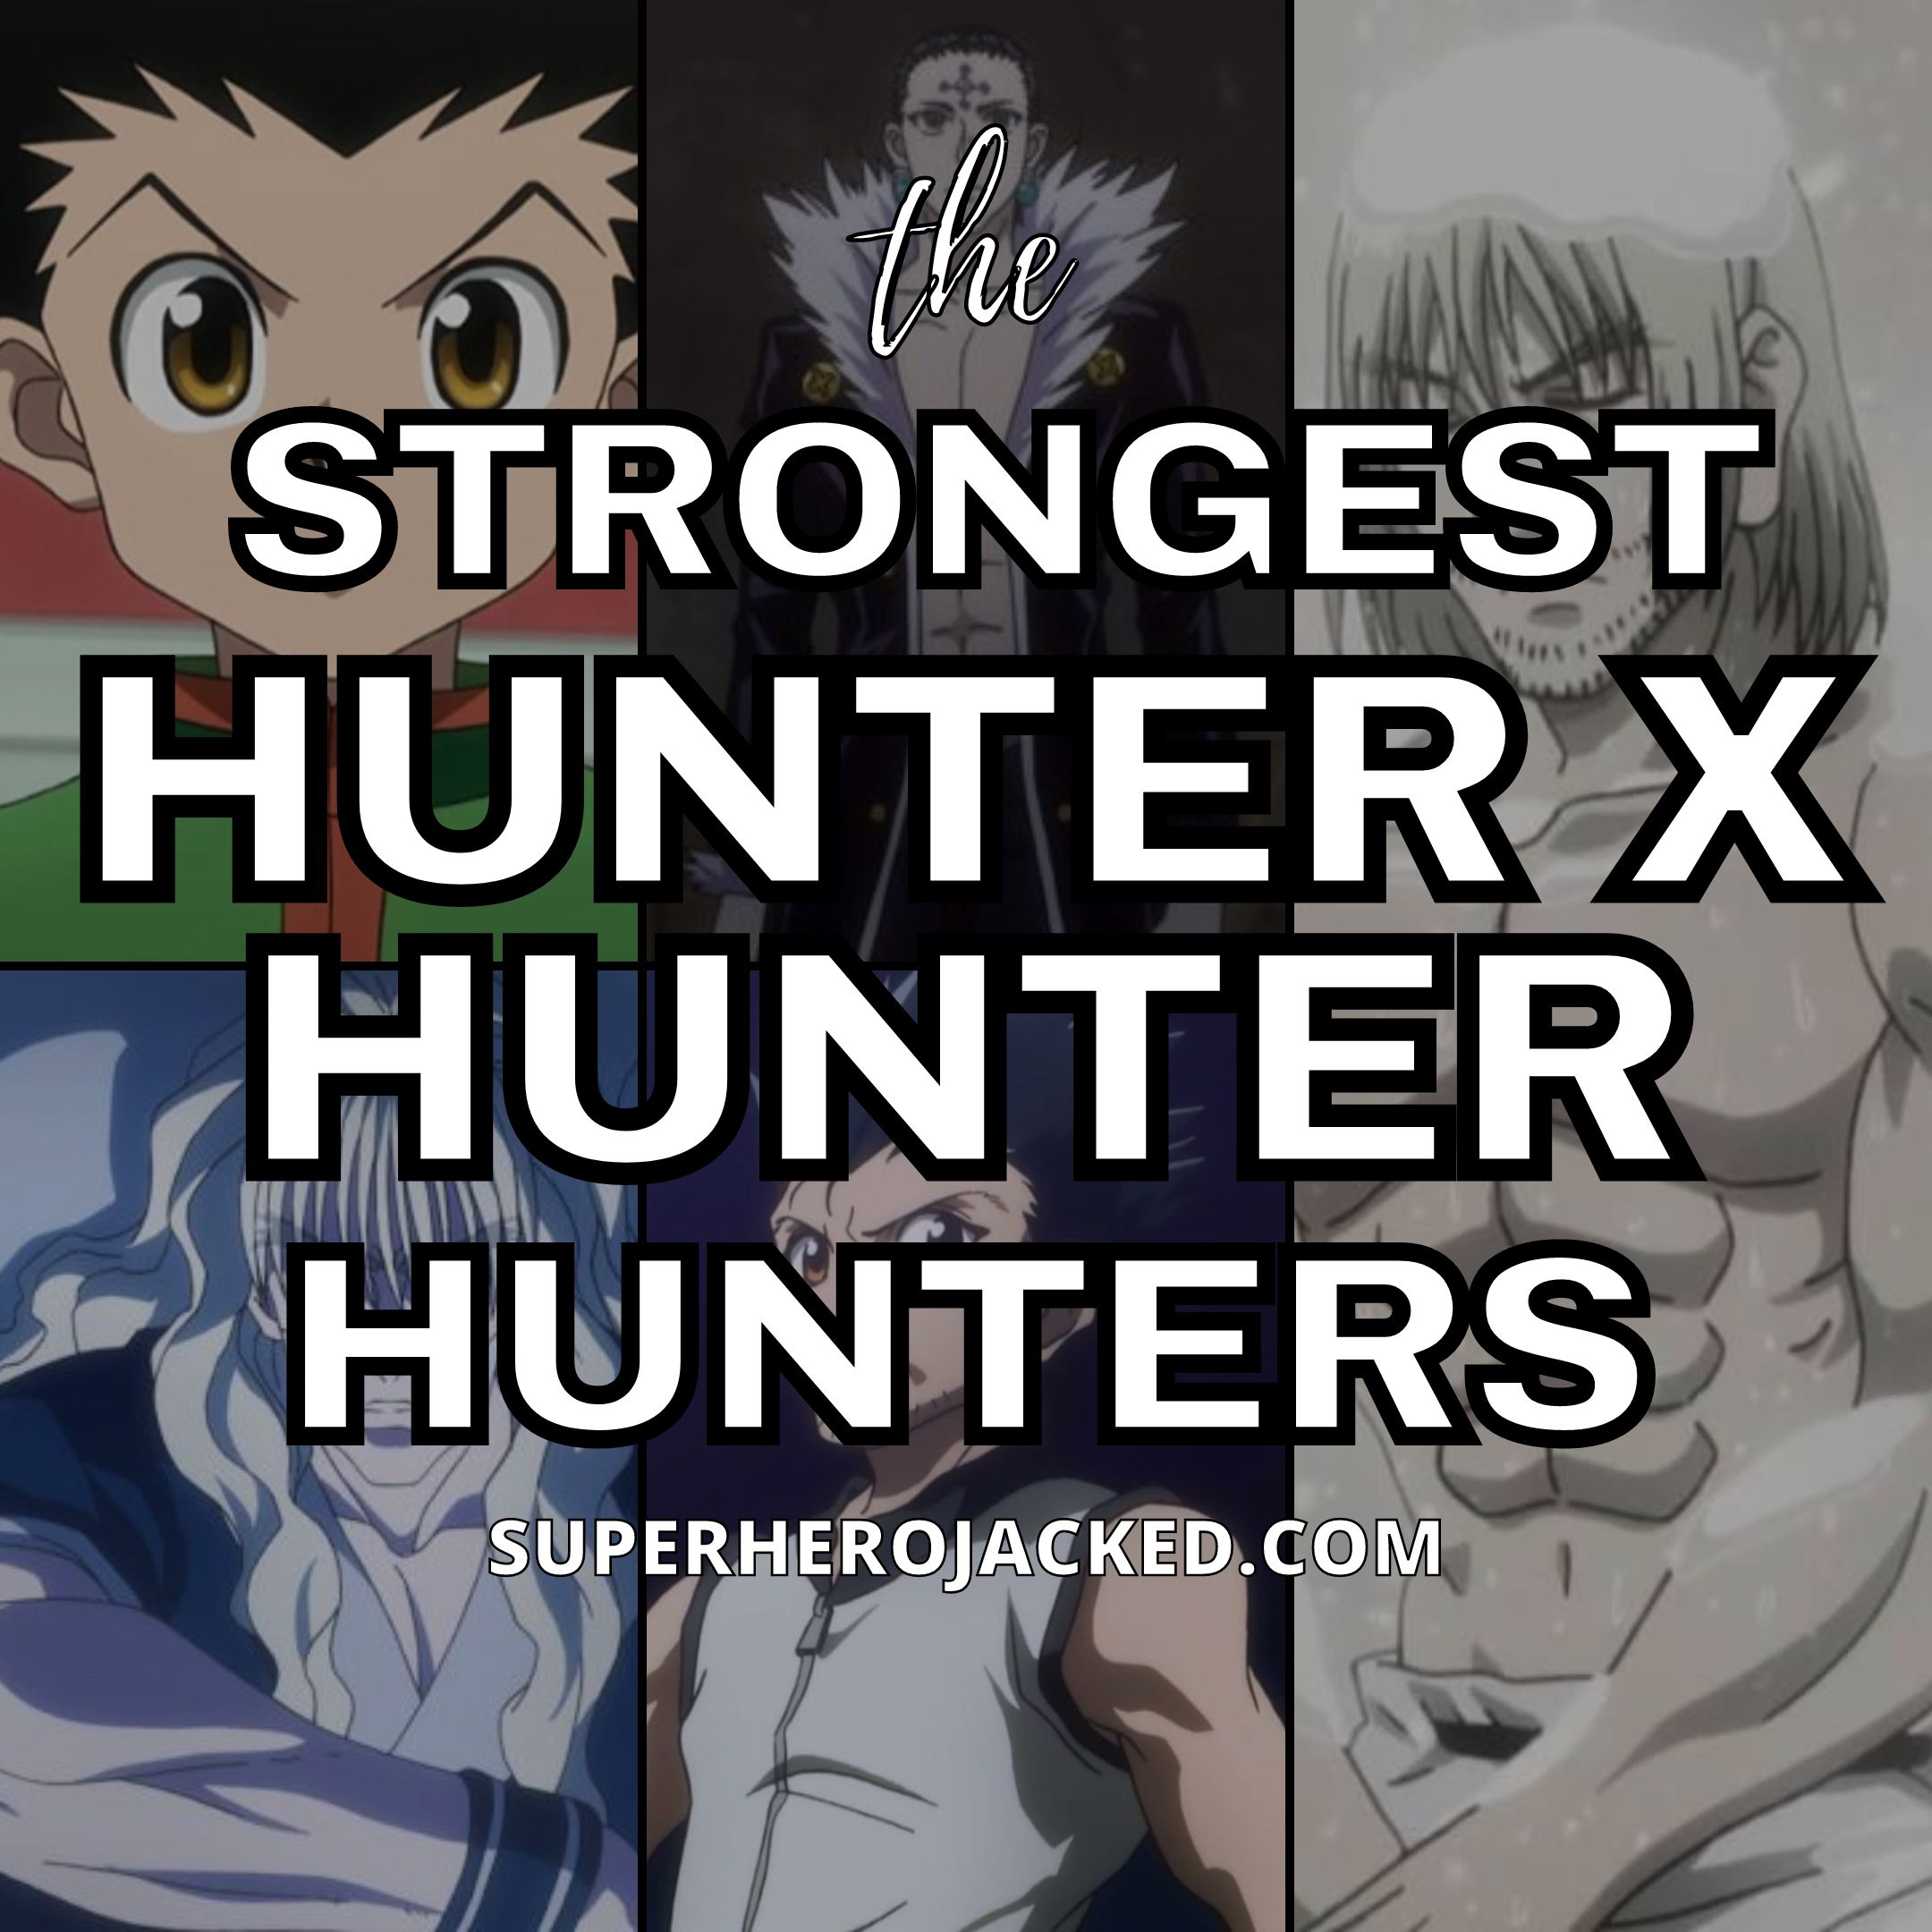 The Strongest Hunter X Hunter Hunters of All Time